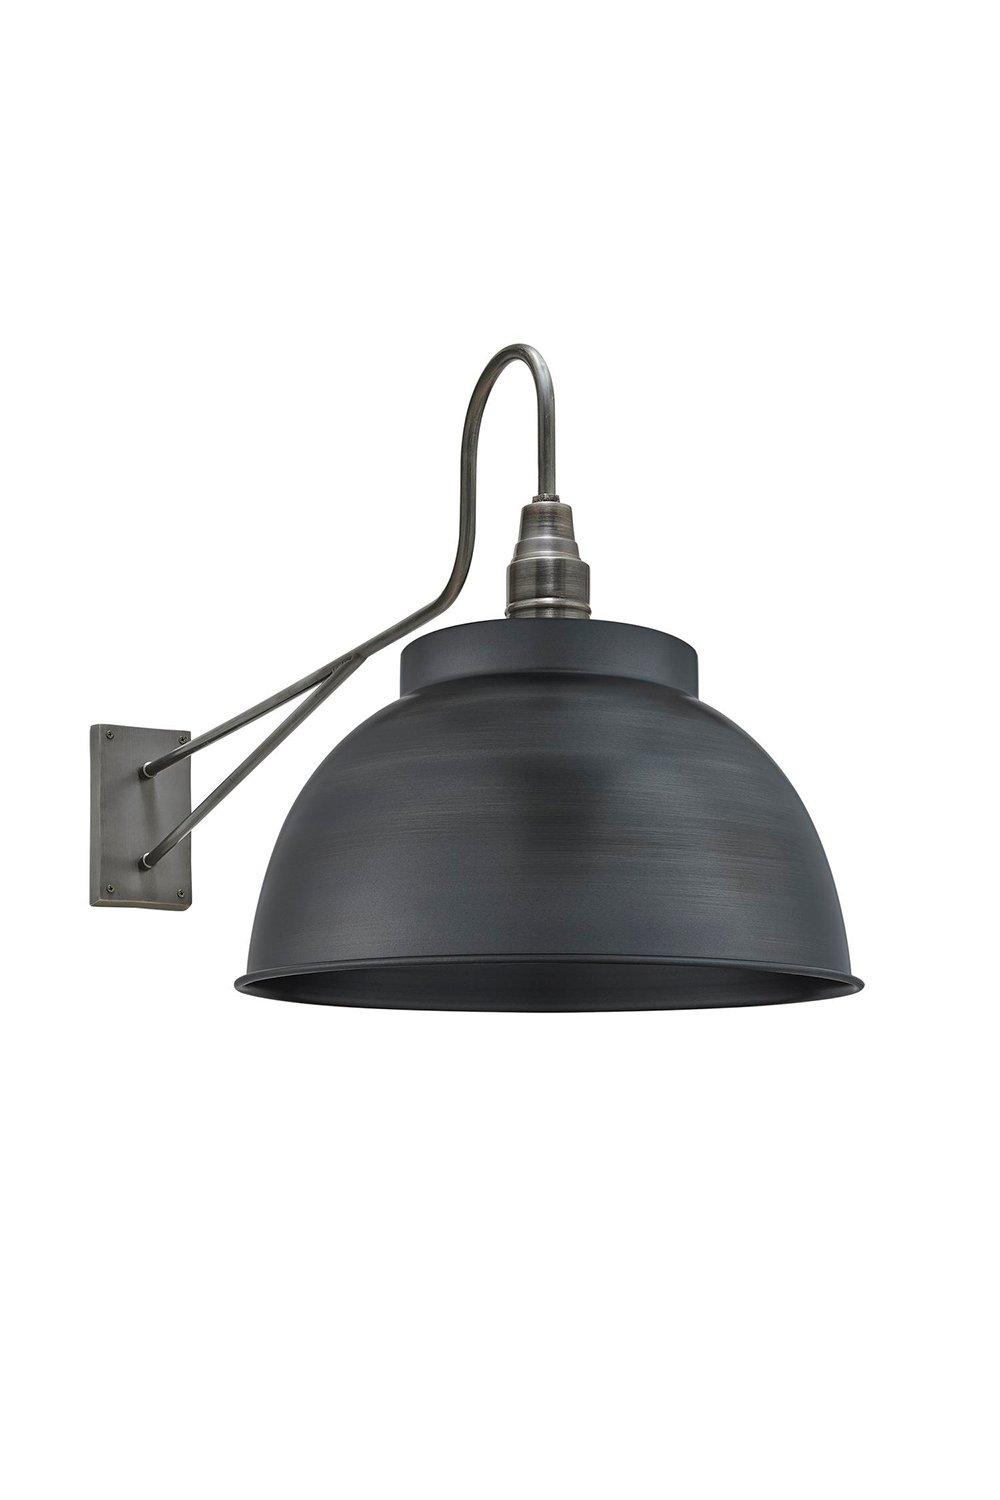 Long Arm Dome Wall Light, 17 Inch, Pewter, Pewter Holder